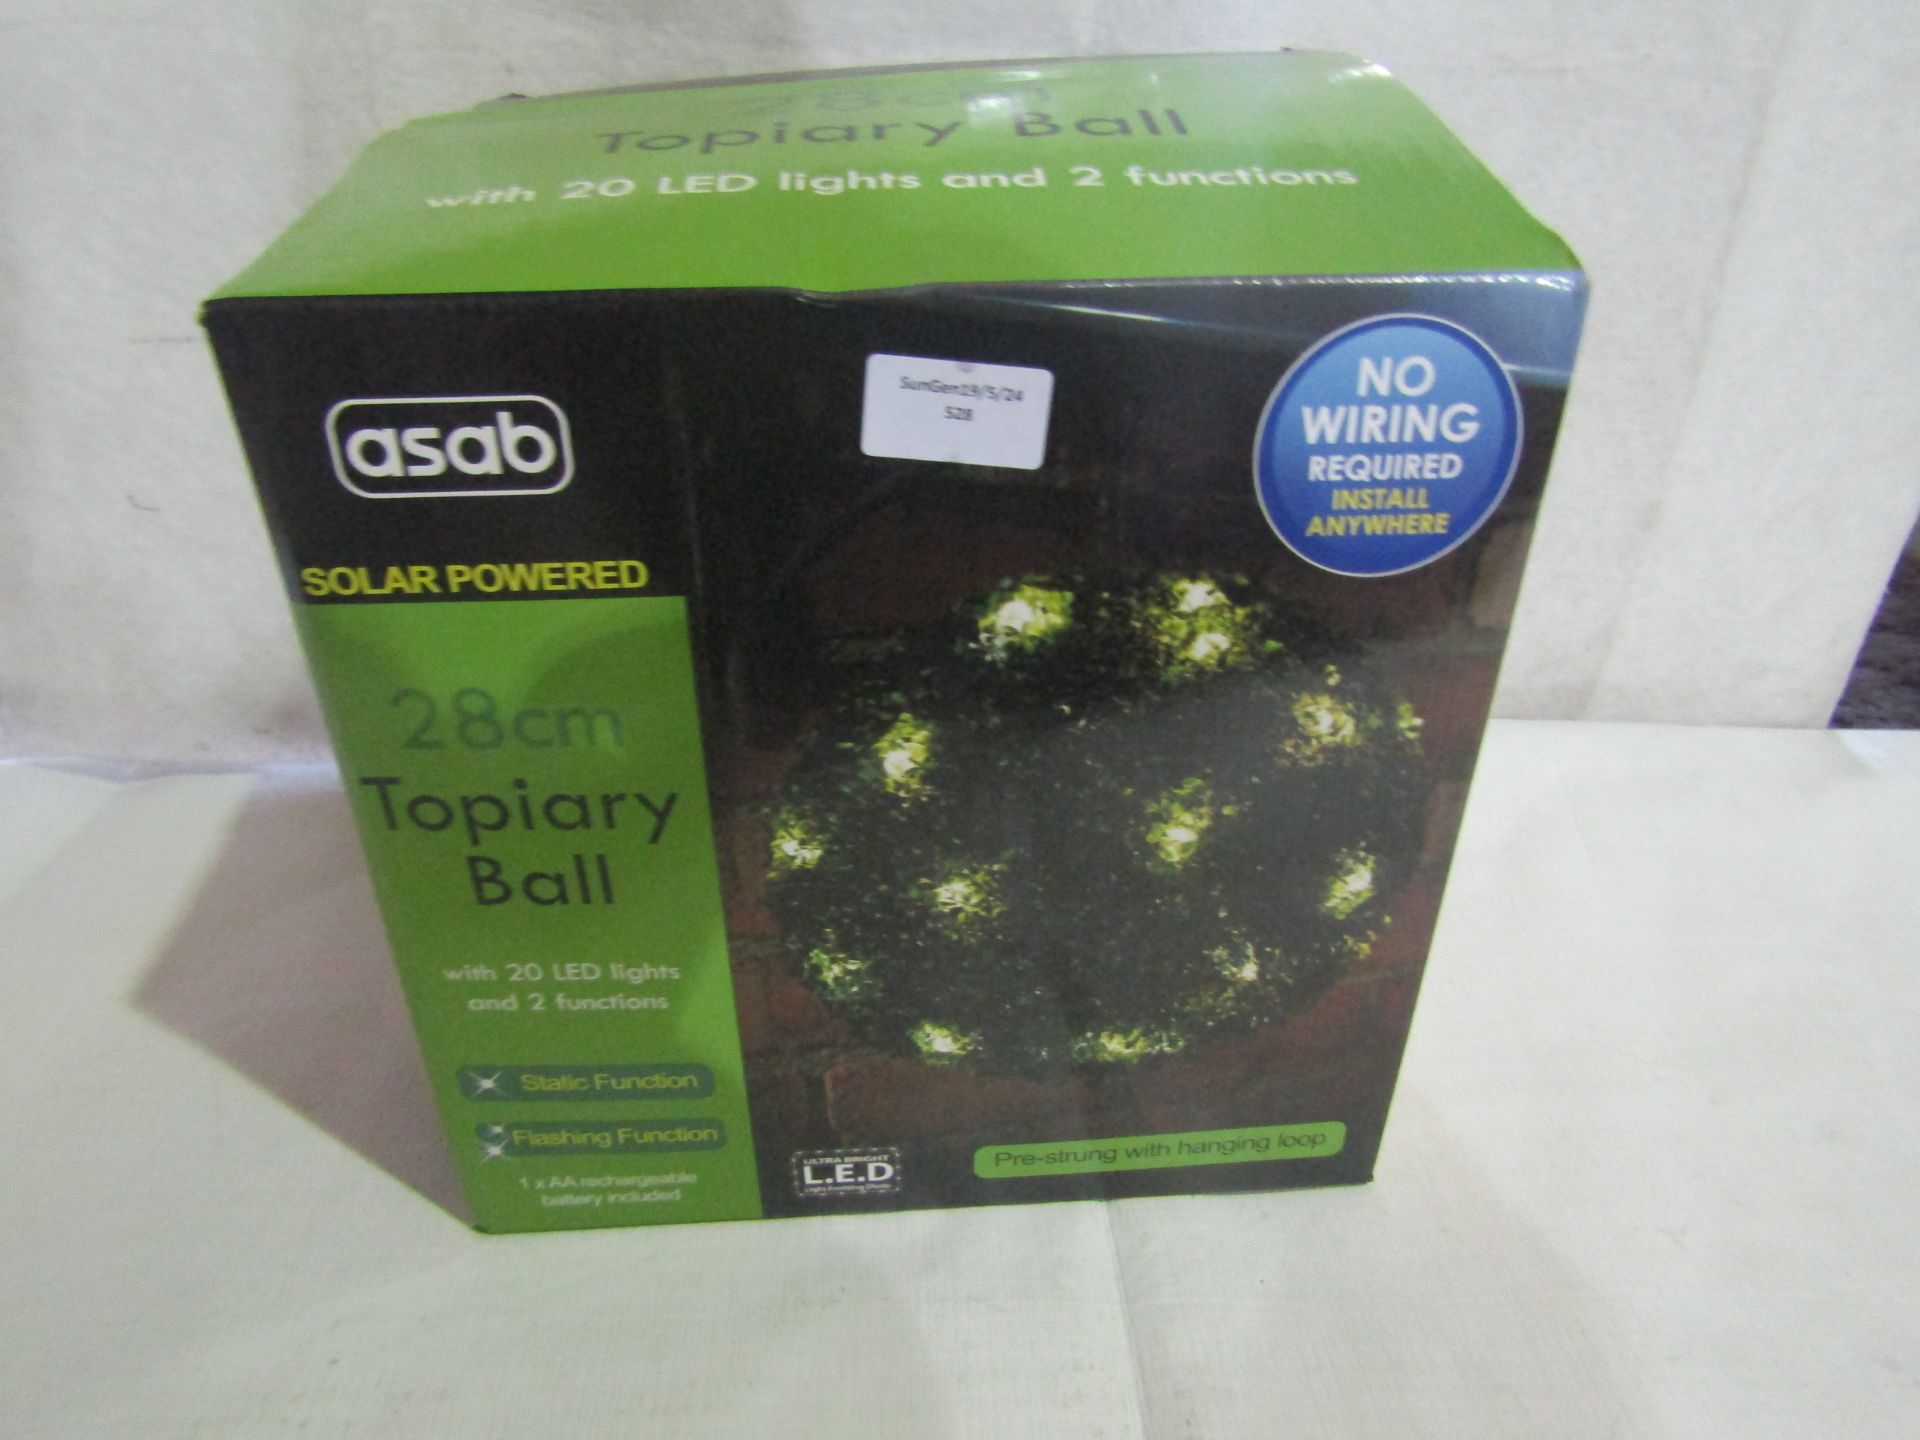 Asab Solar Powered 28cm Topiary Ball With 20 LED Lights & 2 Functions, Green - Unchecked & boxed.